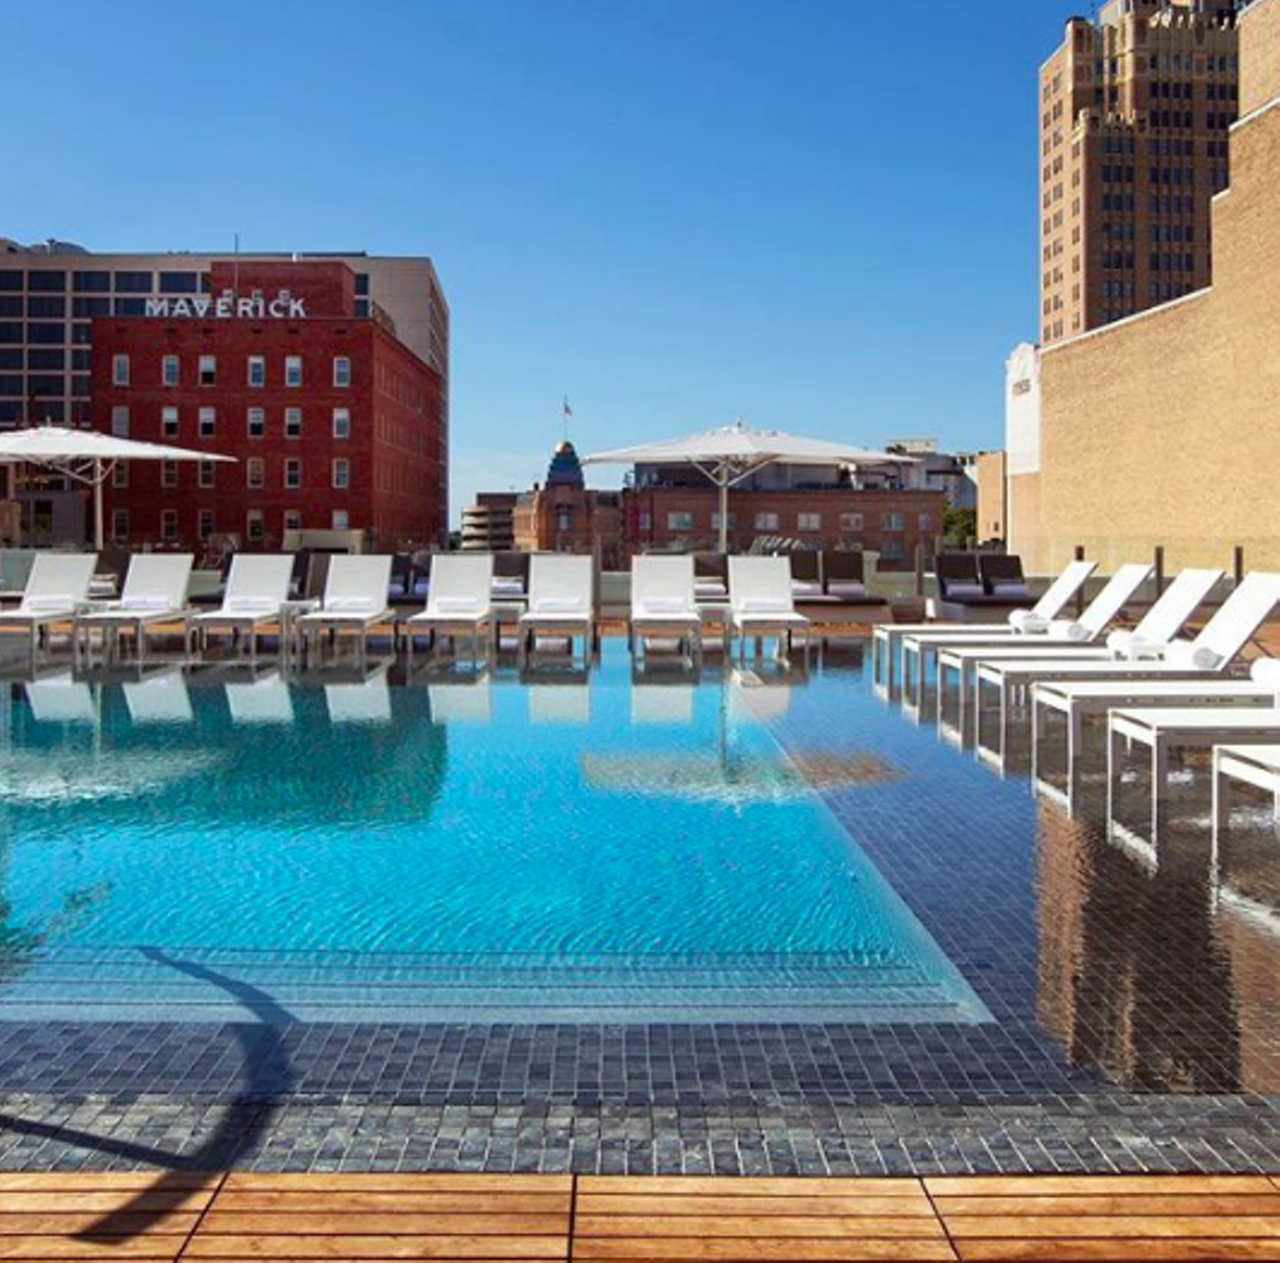 The St. Anthony, A Luxury Collection Hotel
300 E Travis St, (210) 227-4392, marriott.com
Check into this posh downtown hotel and treat yourself to a delightful staycation. Obviously, you’ll want to spend some time at the rooftop infinity pool. Be sure to reserve one of the cabanas so you can truly enjoy the full experience.
Photo via Instagram / thestanthonyhotel